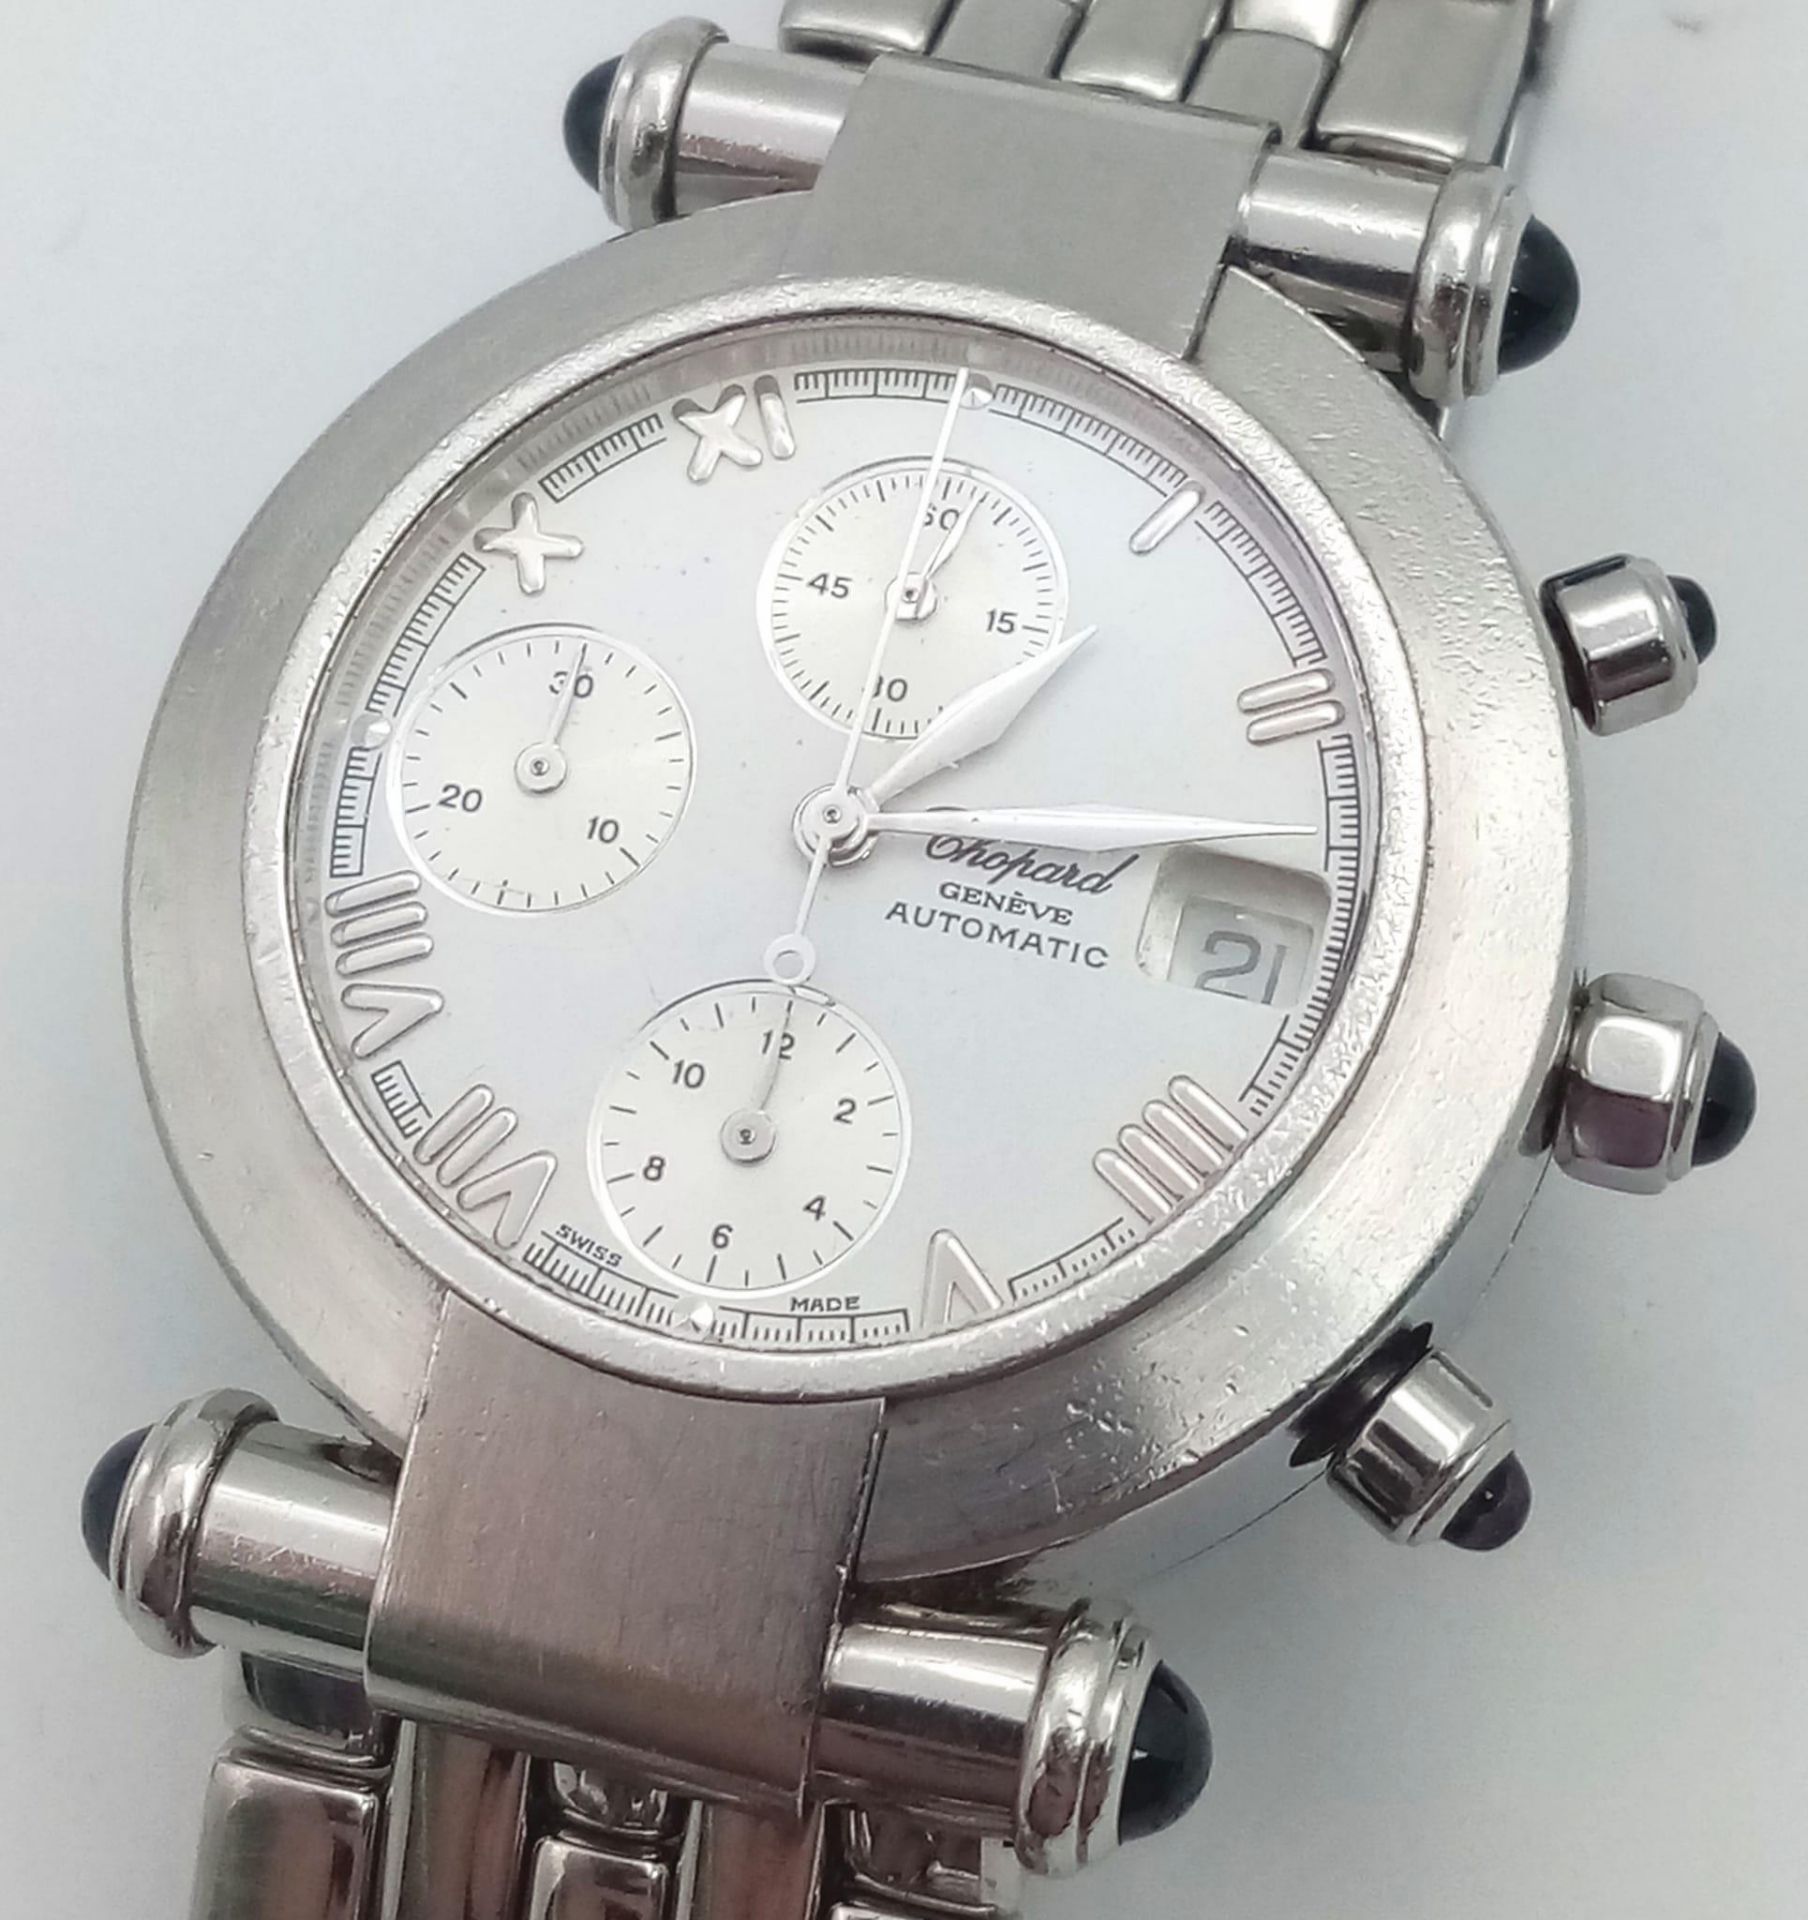 A Chopard Automatic Chronograph Gents Watch. Stainless steel bracelet and case - 37mm. White dial - Image 6 of 8